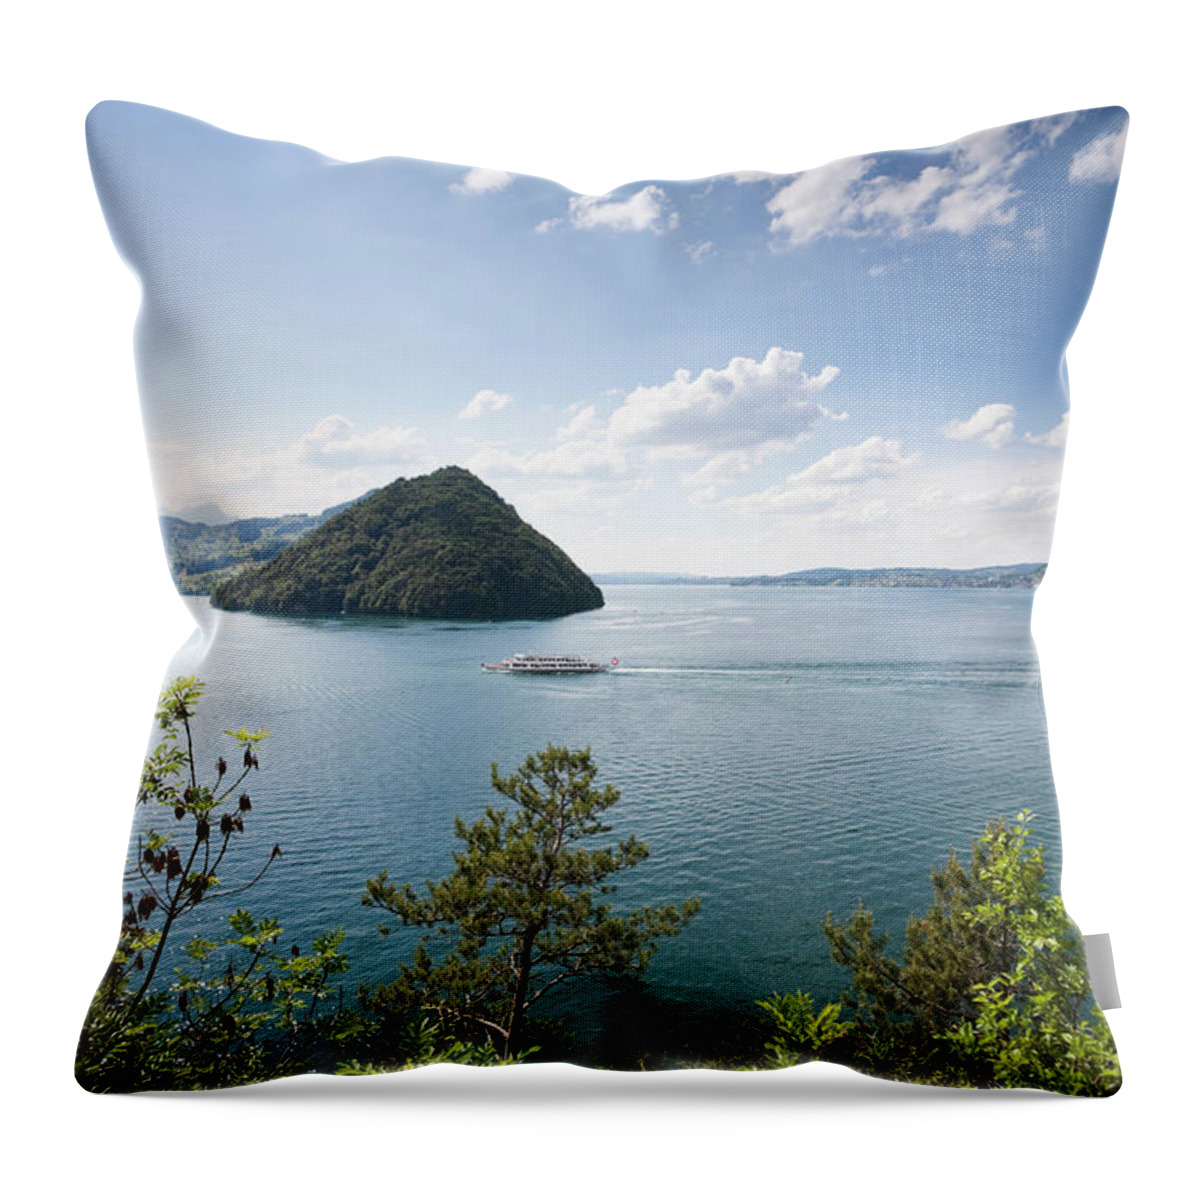 Ip_10266172 Throw Pillow featuring the photograph View Of Burgenstock Mountain And Ship In Lake Lucerne, Lucerne, Switzerland by Jalag / Arthur F. Selbach